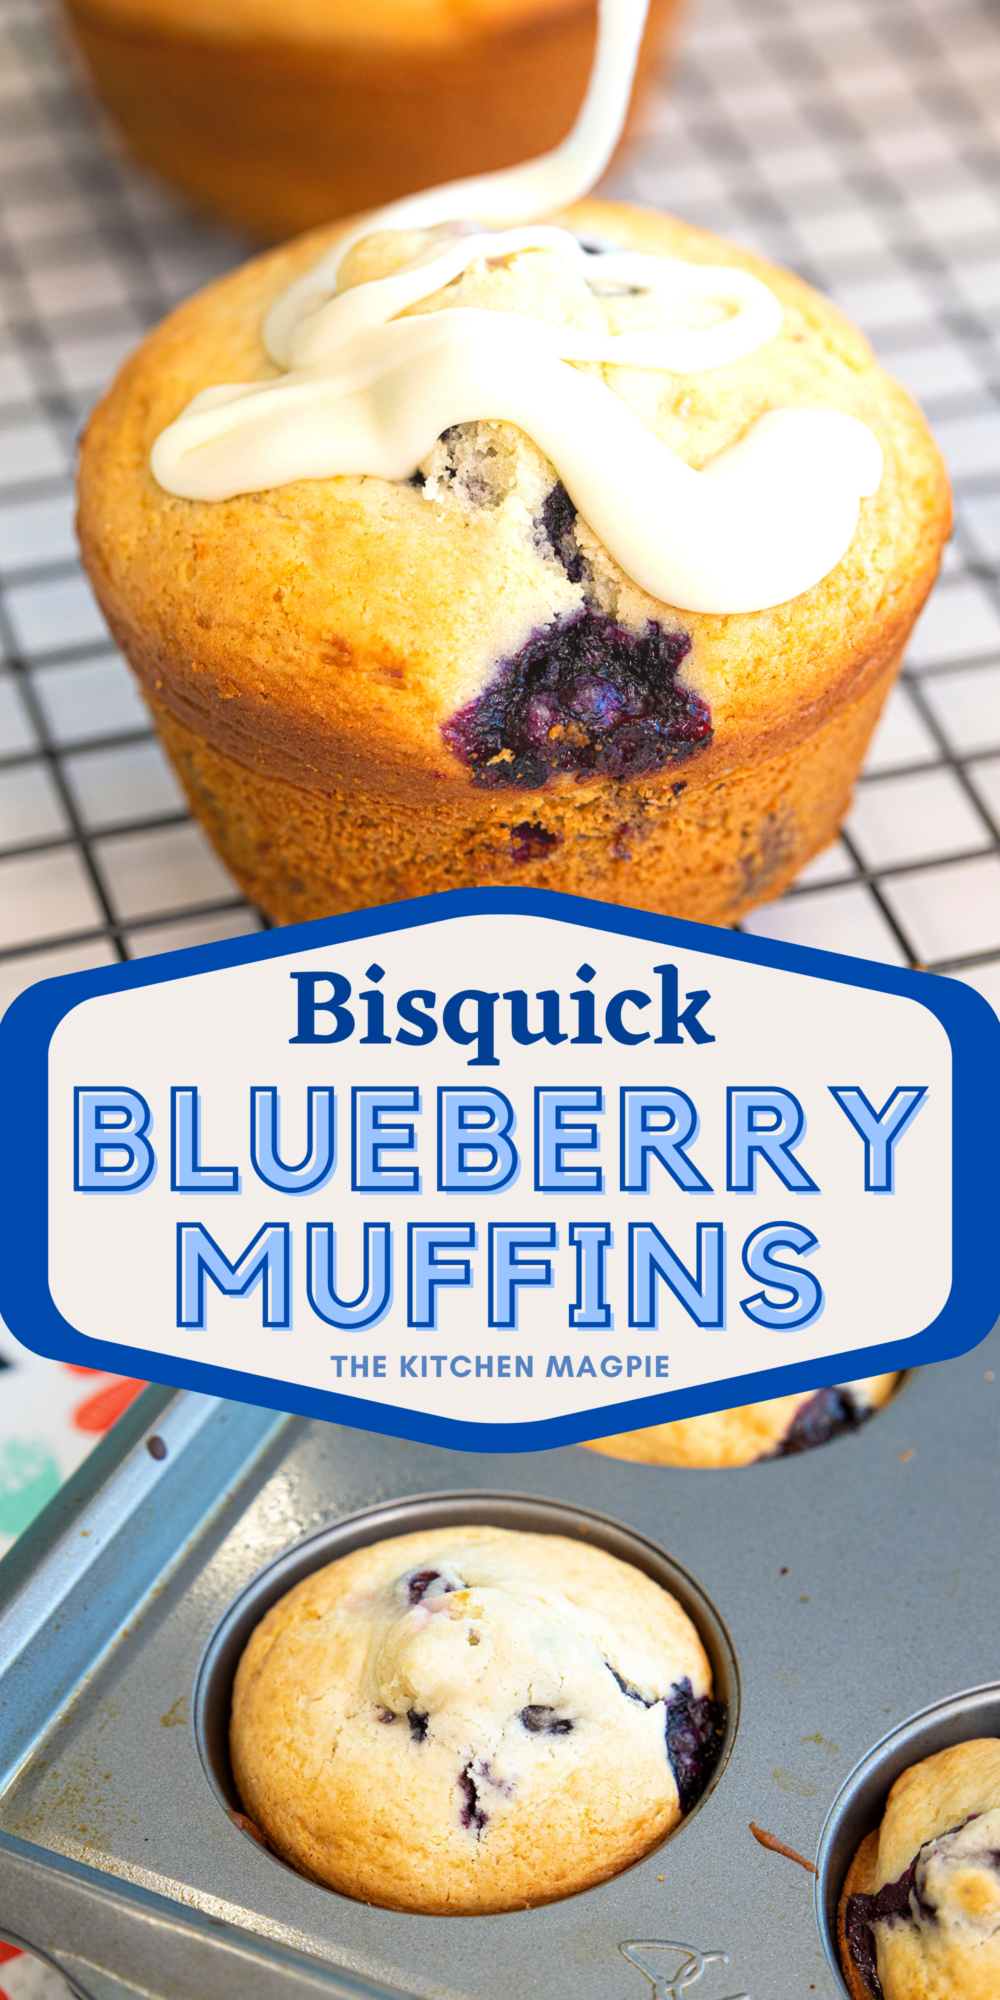 Have some Bisquick and some blueberries to use up? Try these fast and delicious Bisquick blueberry muffins!